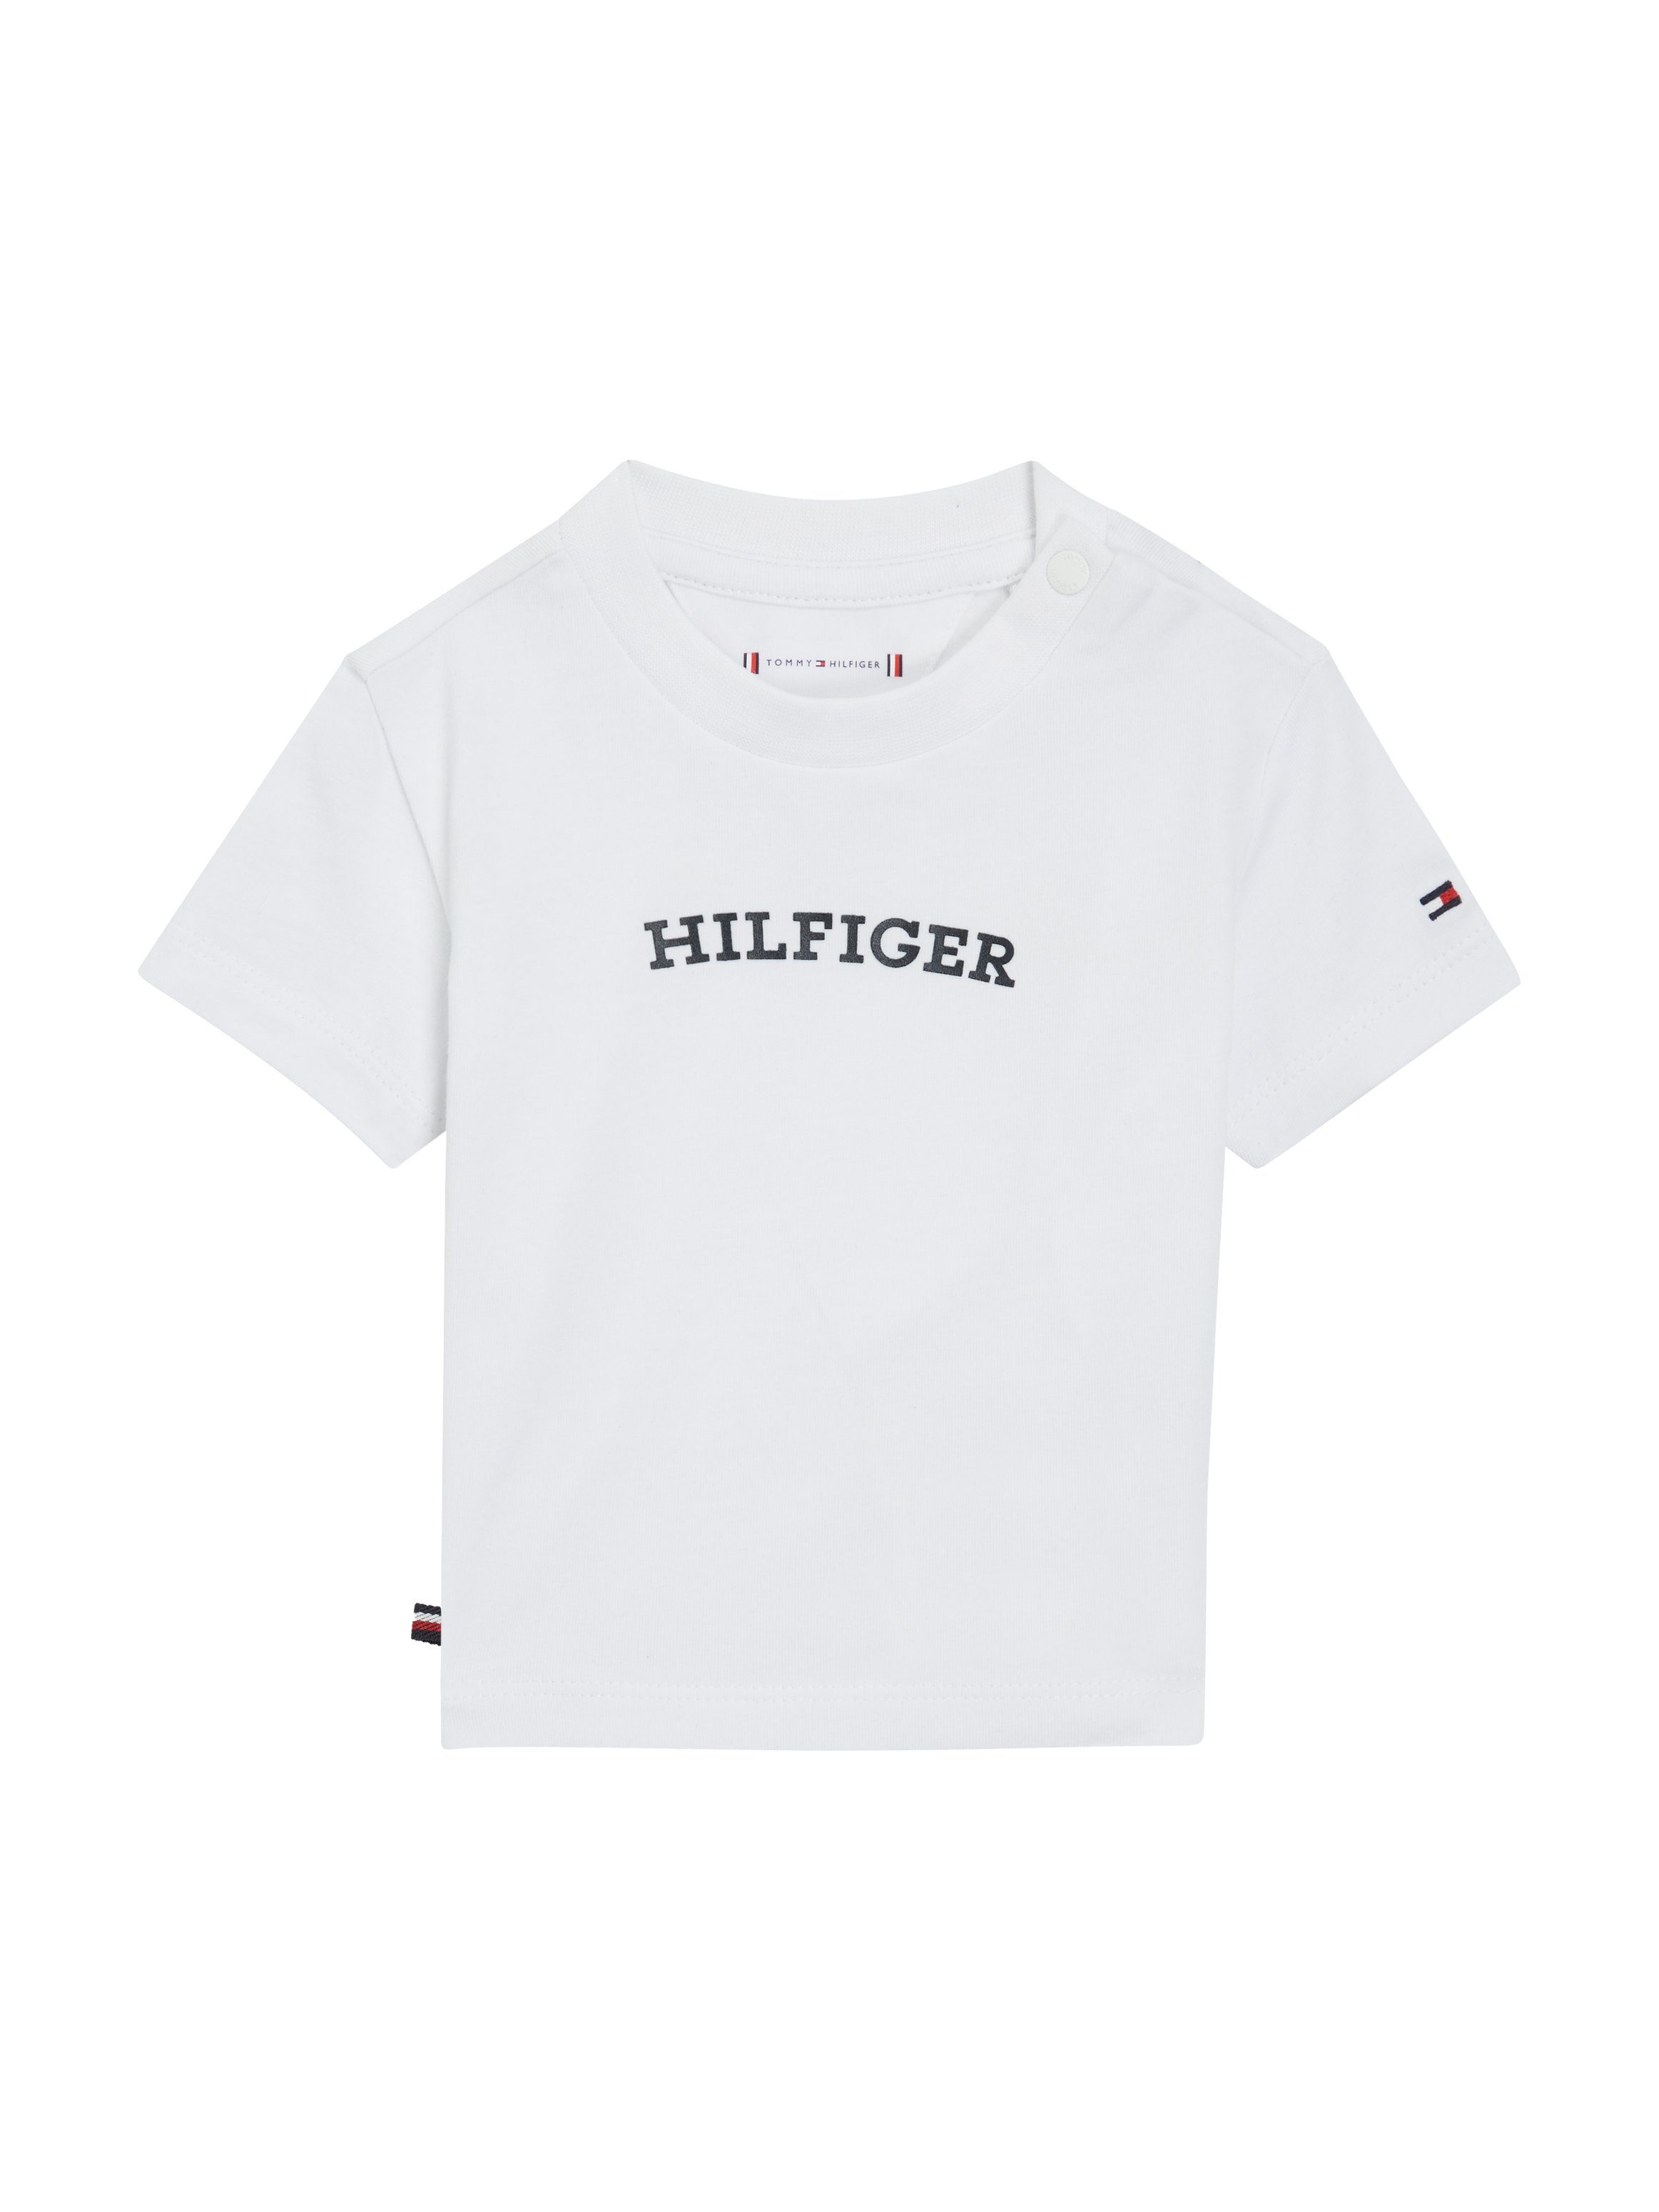 Tommy Hilfiger Logo-Flag & MONOTYPE T-Shirt BABY White Front S/S Hilfiger TEE Print mit CURVED großem